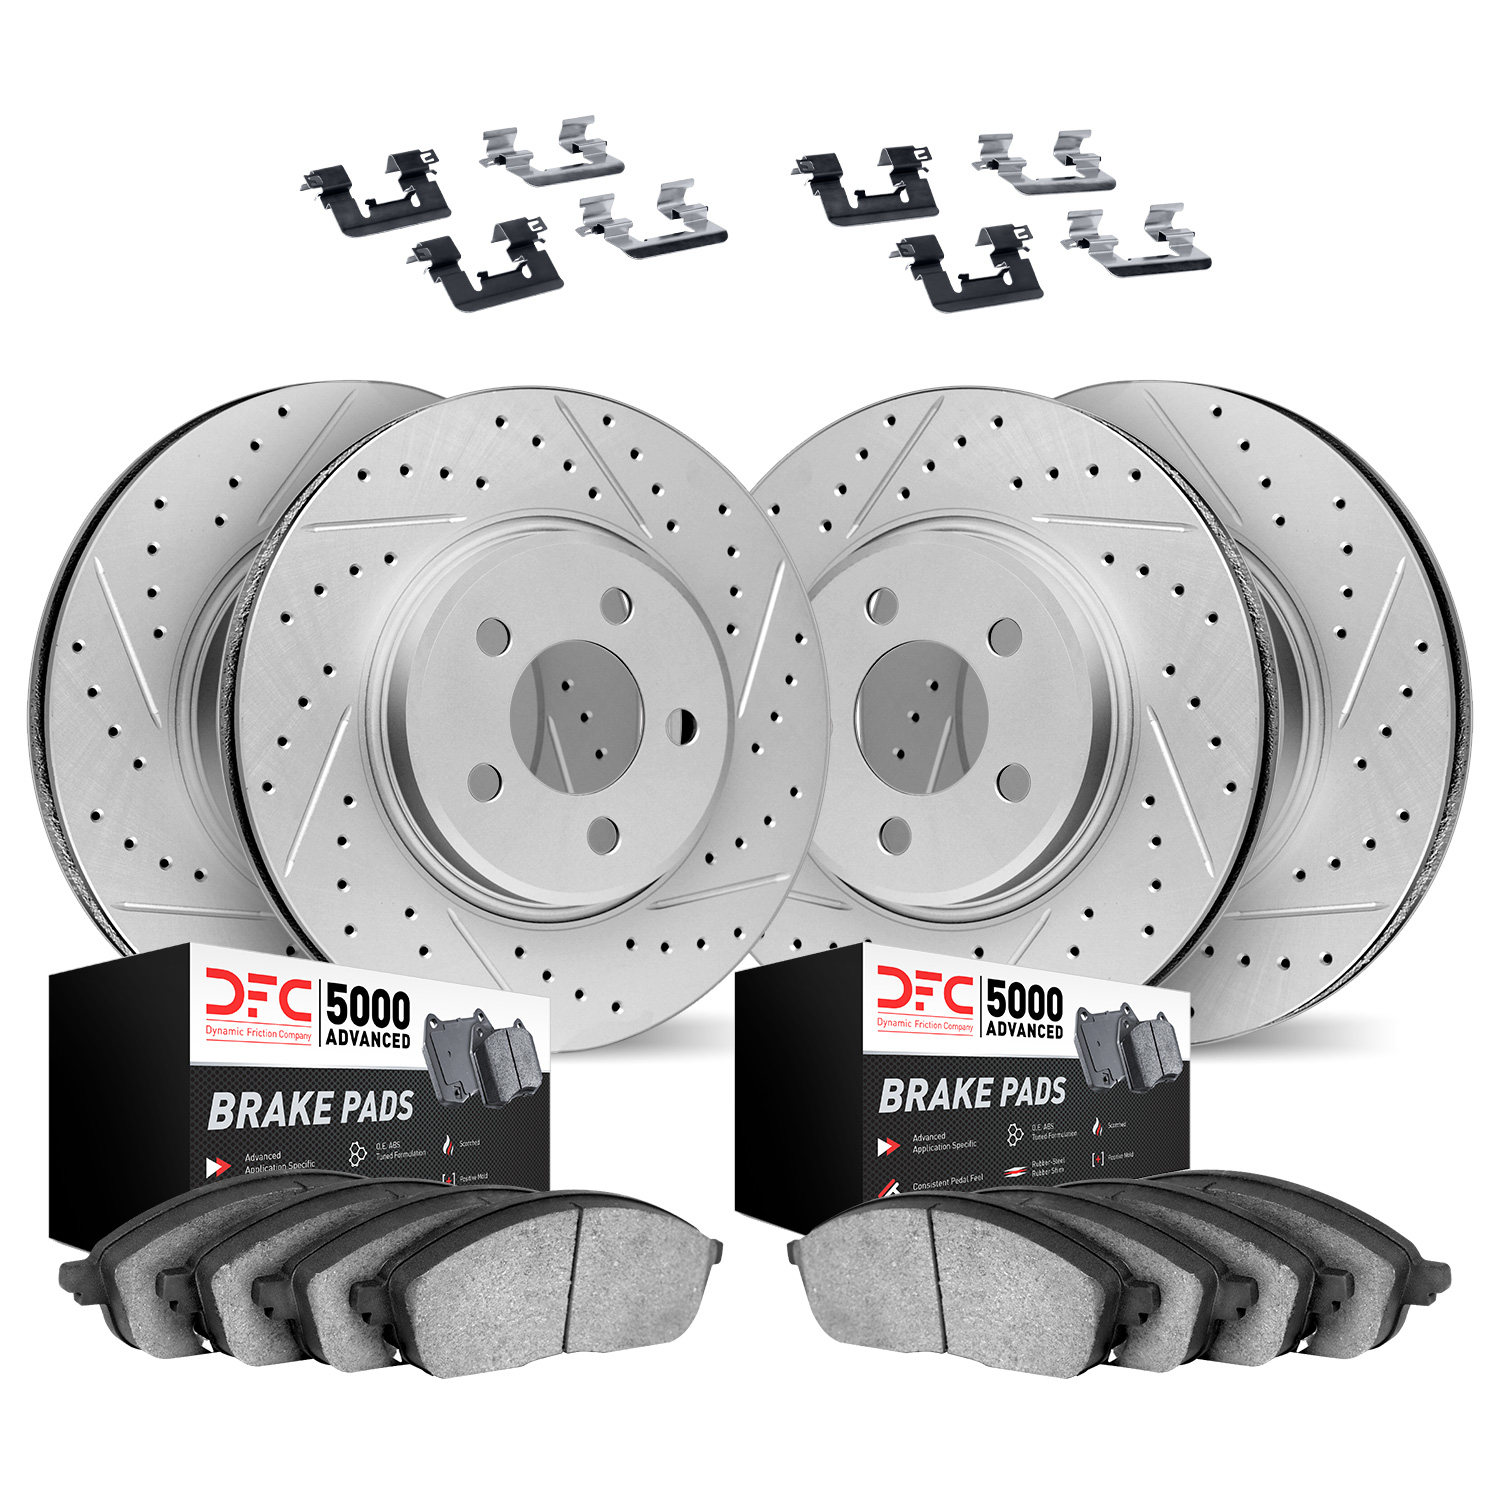 2514-63004 Geoperformance Drilled/Slotted Rotors w/5000 Advanced Brake Pads Kit & Hardware, Fits Select Mercedes-Benz, Position: